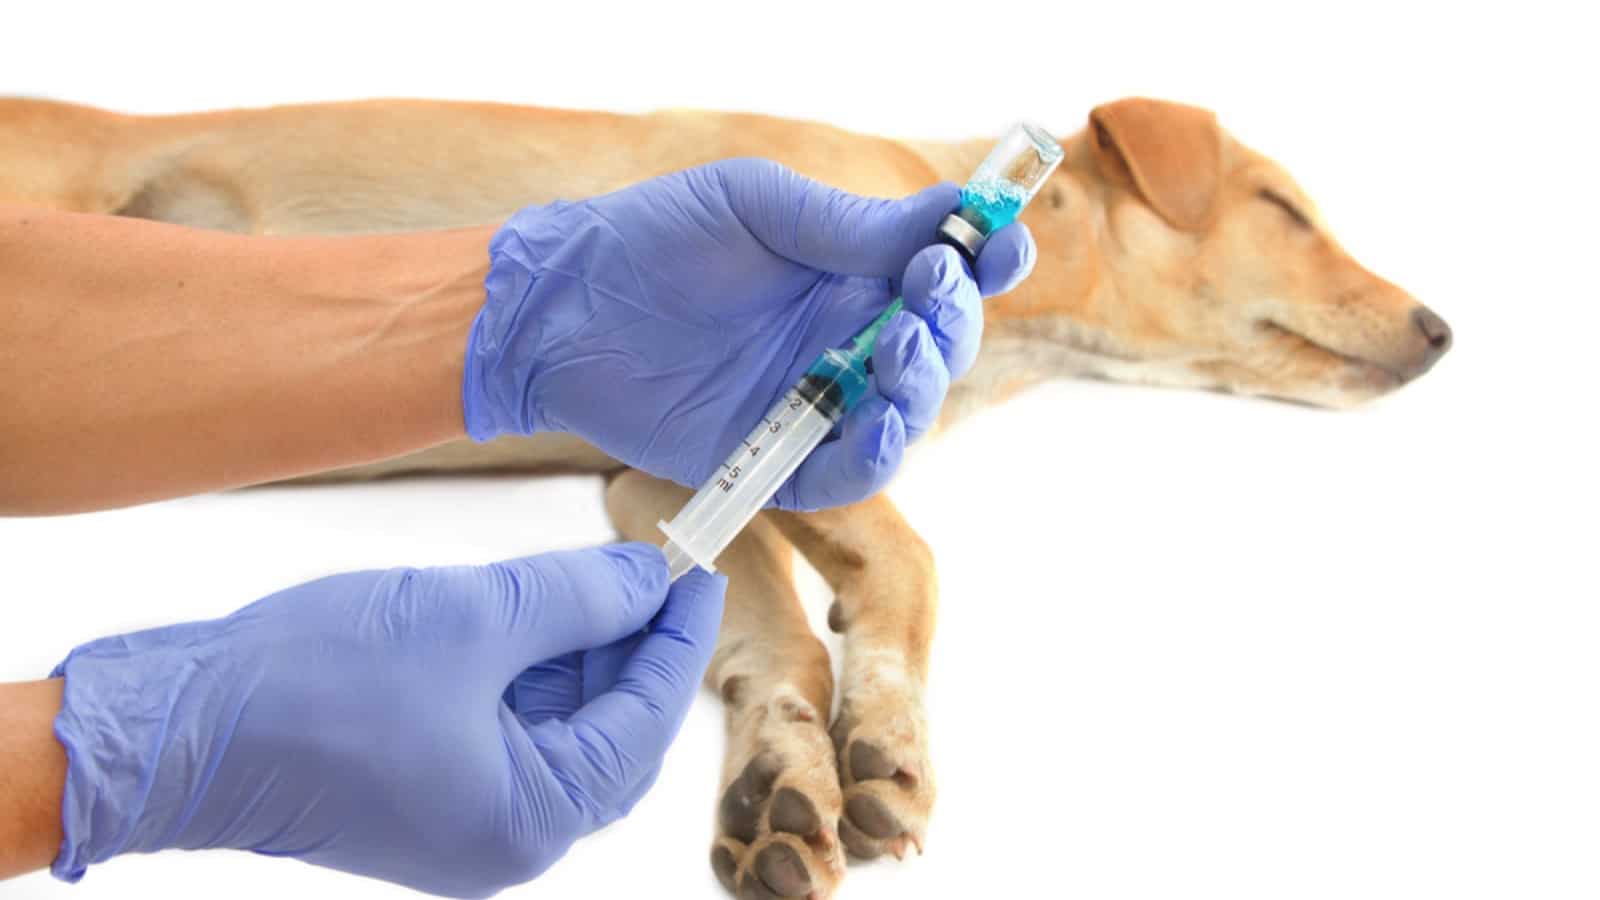 Veterinarian giving injection to a dog